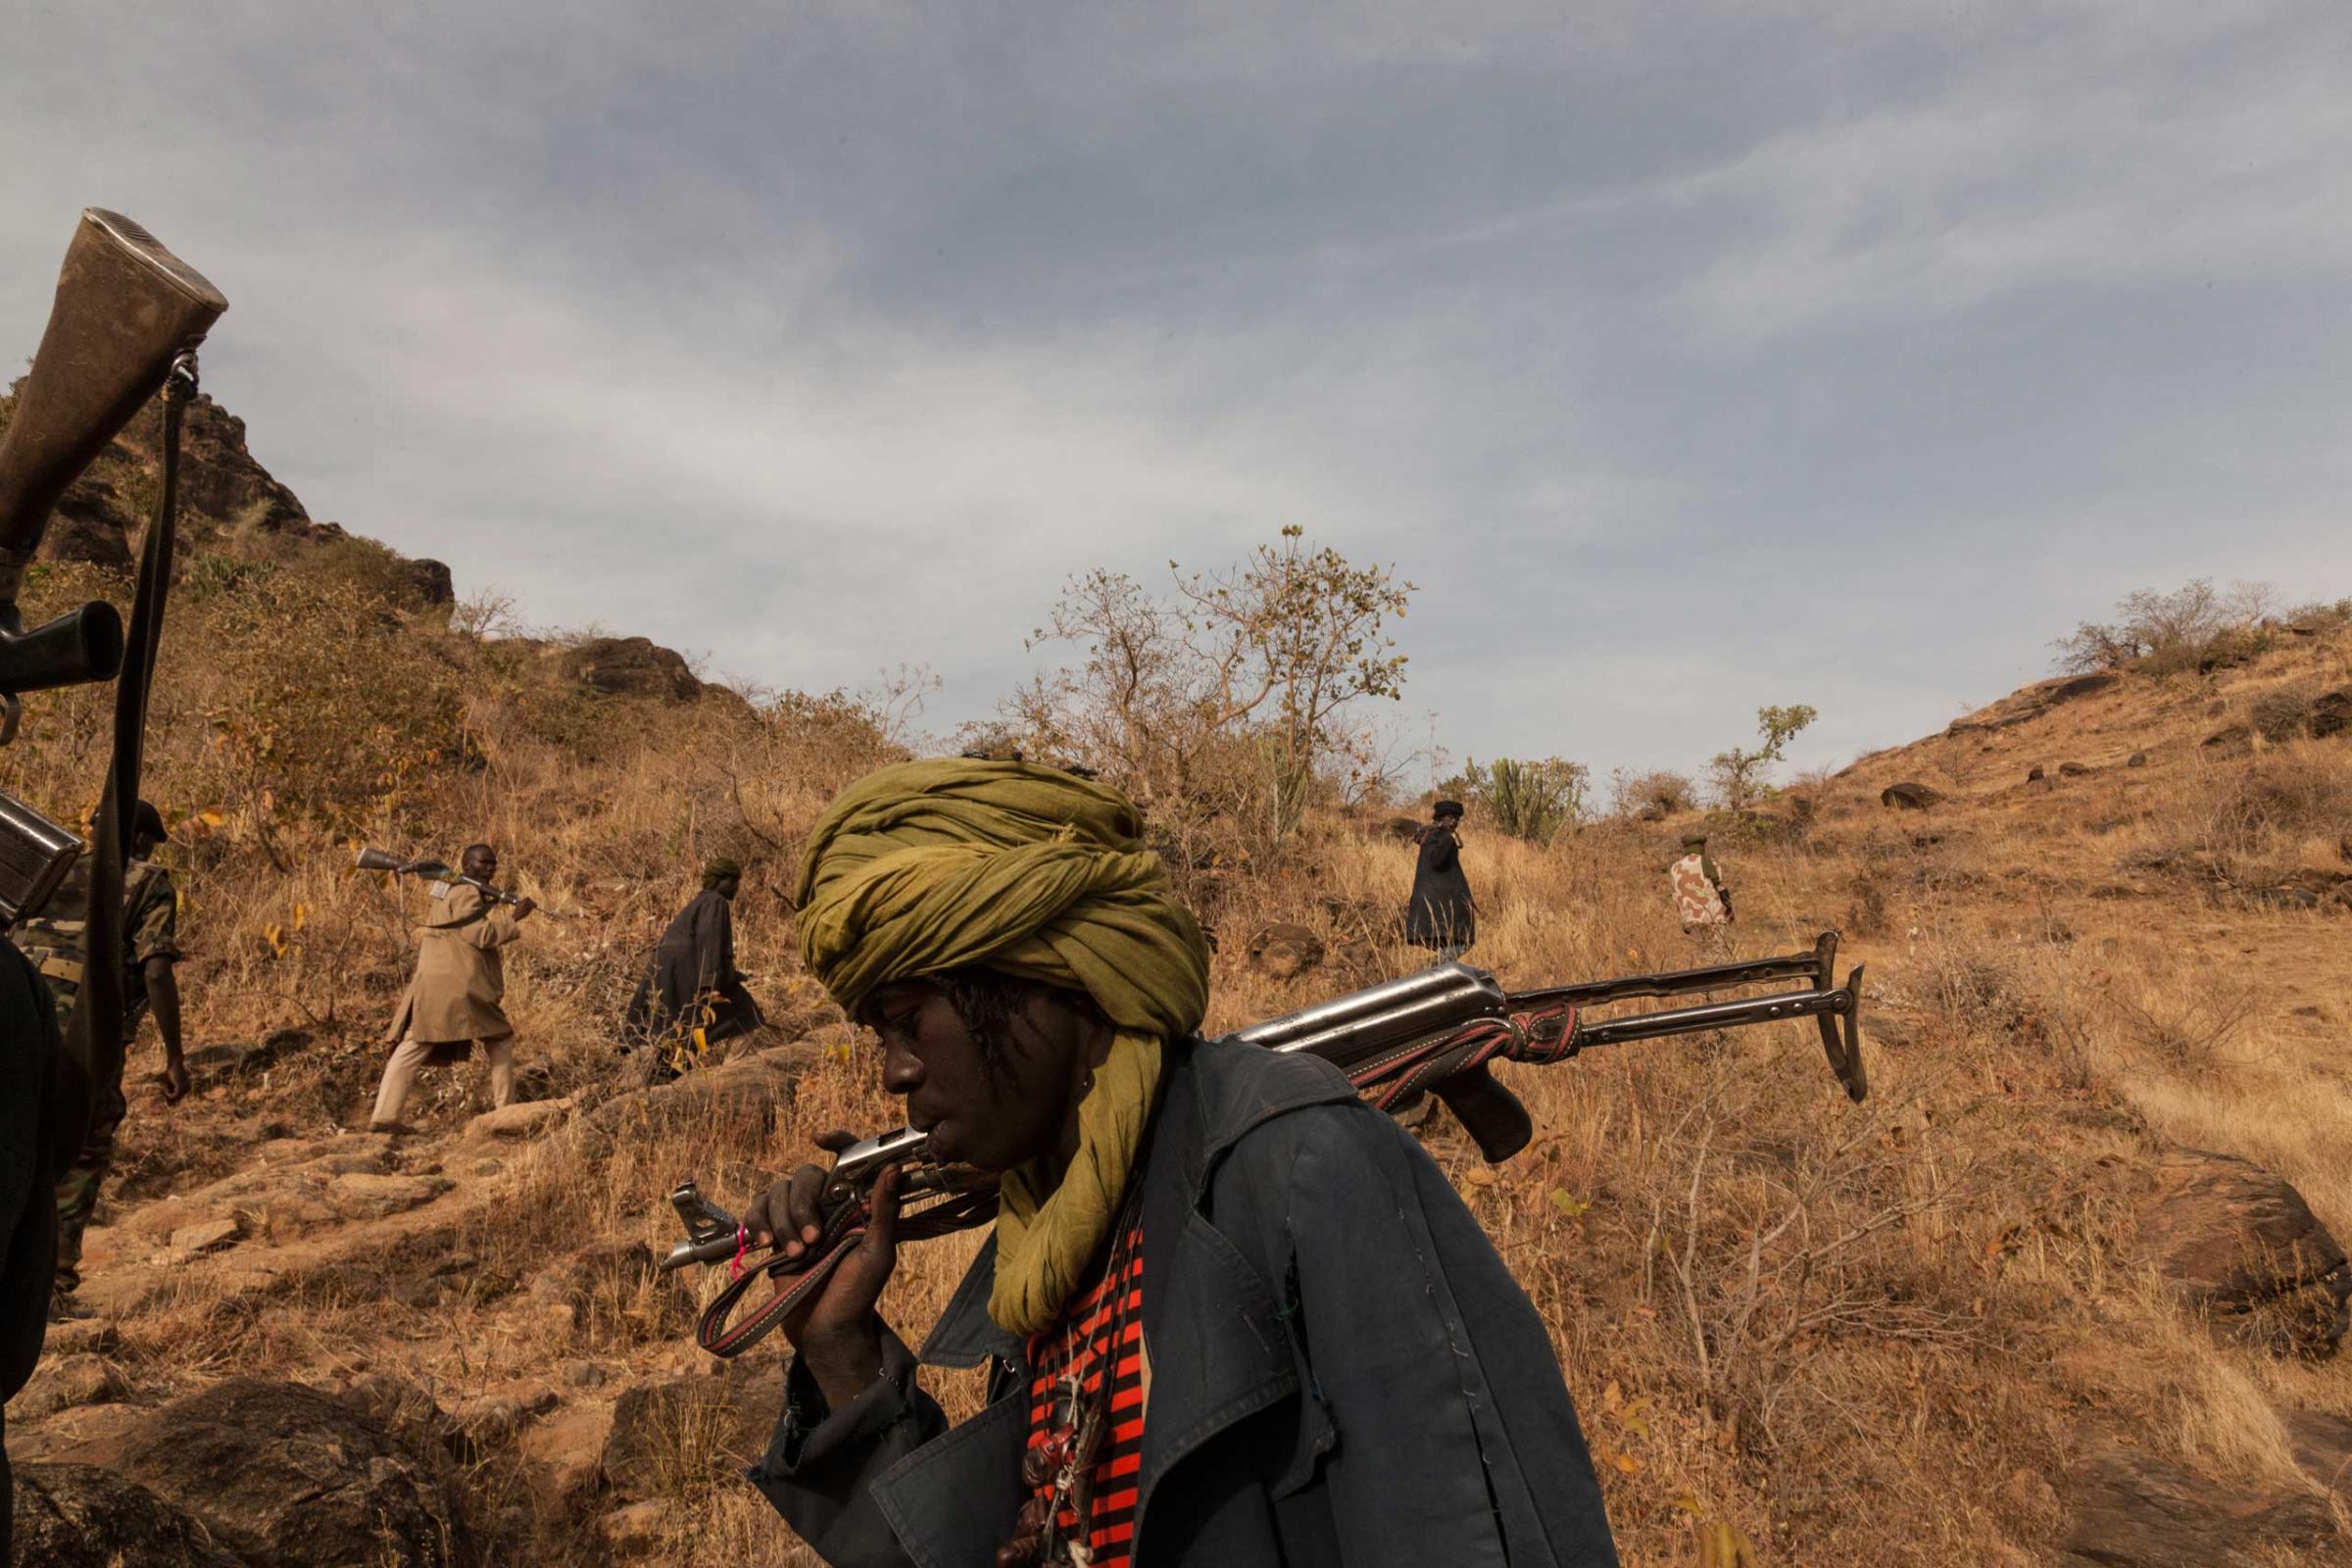 Members of the rebel group Sudan Liberation Army led by Abdul Wahid (SLA-AW) climb towards the front lines in Jebel Marra, Central Darfur, Sudan, on March 4, 2015. The mountainous area has been a stronghold of the SLA-AW since the conflict between the neglected population and the Sudanese government broke out in 2003.